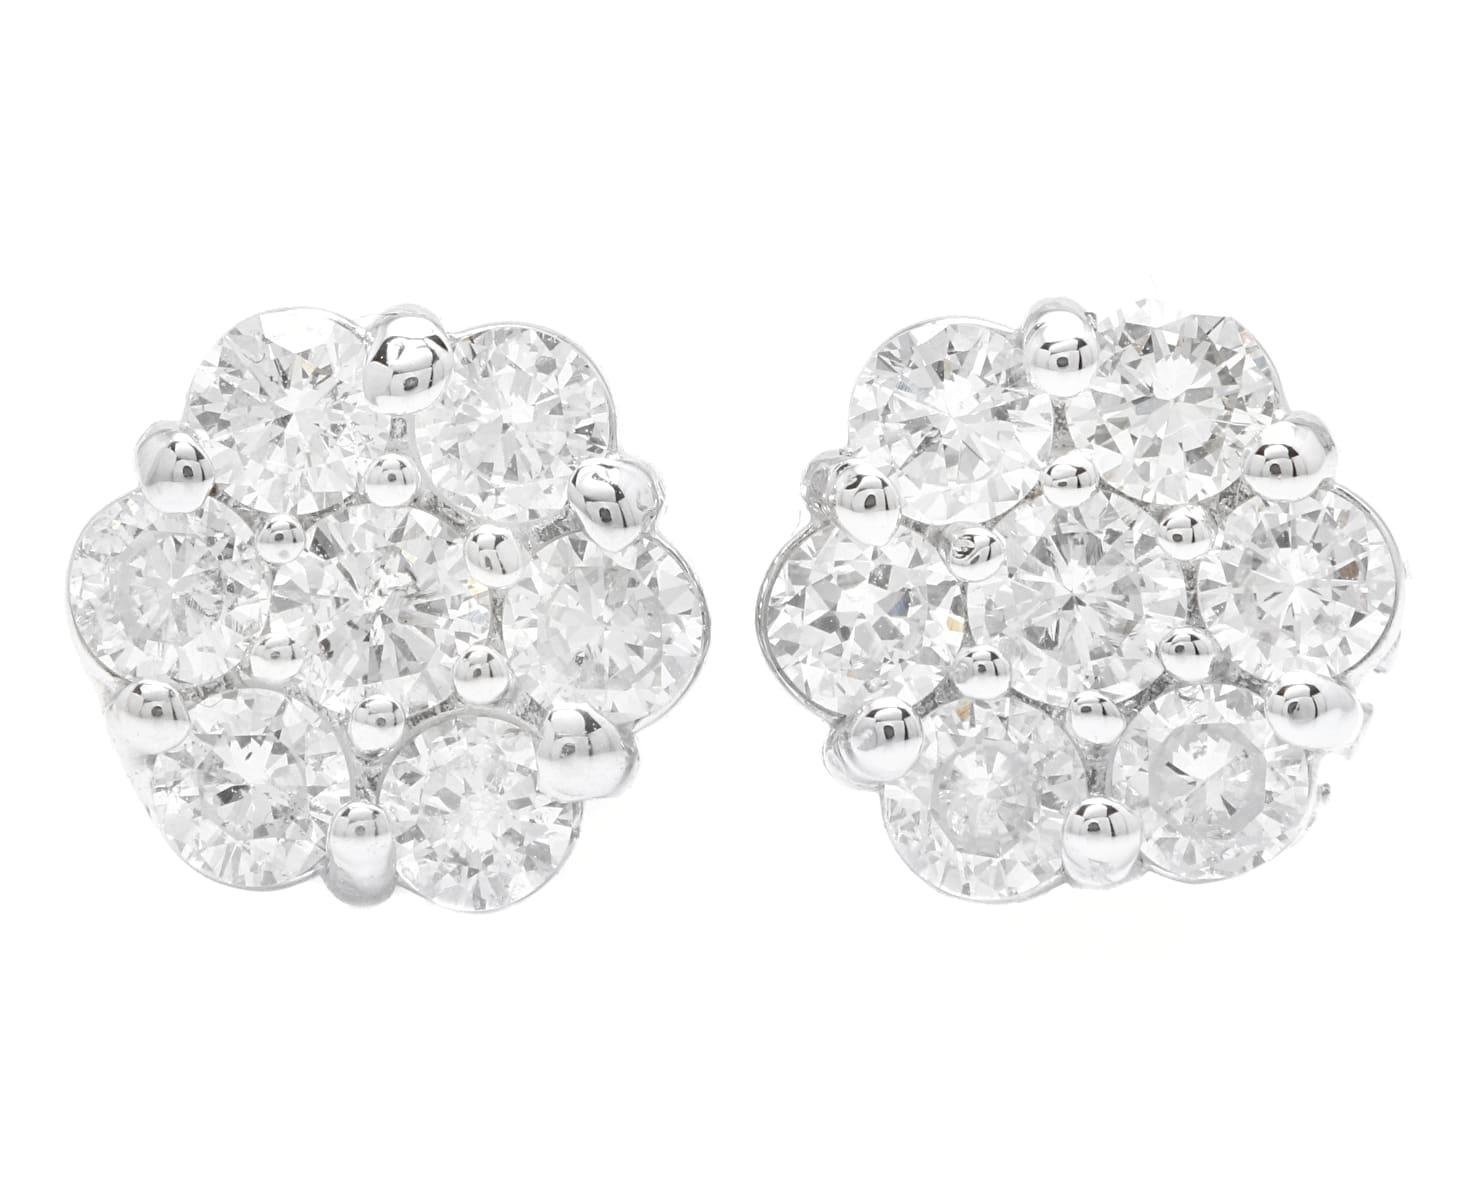 Exquisite 1.40 Carats Natural Diamond 14K Solid White Gold Stud Earrings

Amazing looking piece! 

Suggested Replacement Value: $5,000.00

Total Natural Round Cut Diamonds Weight: Approx. 1.40 Carats (both earrings) SI1 / G-H

Diameter of the